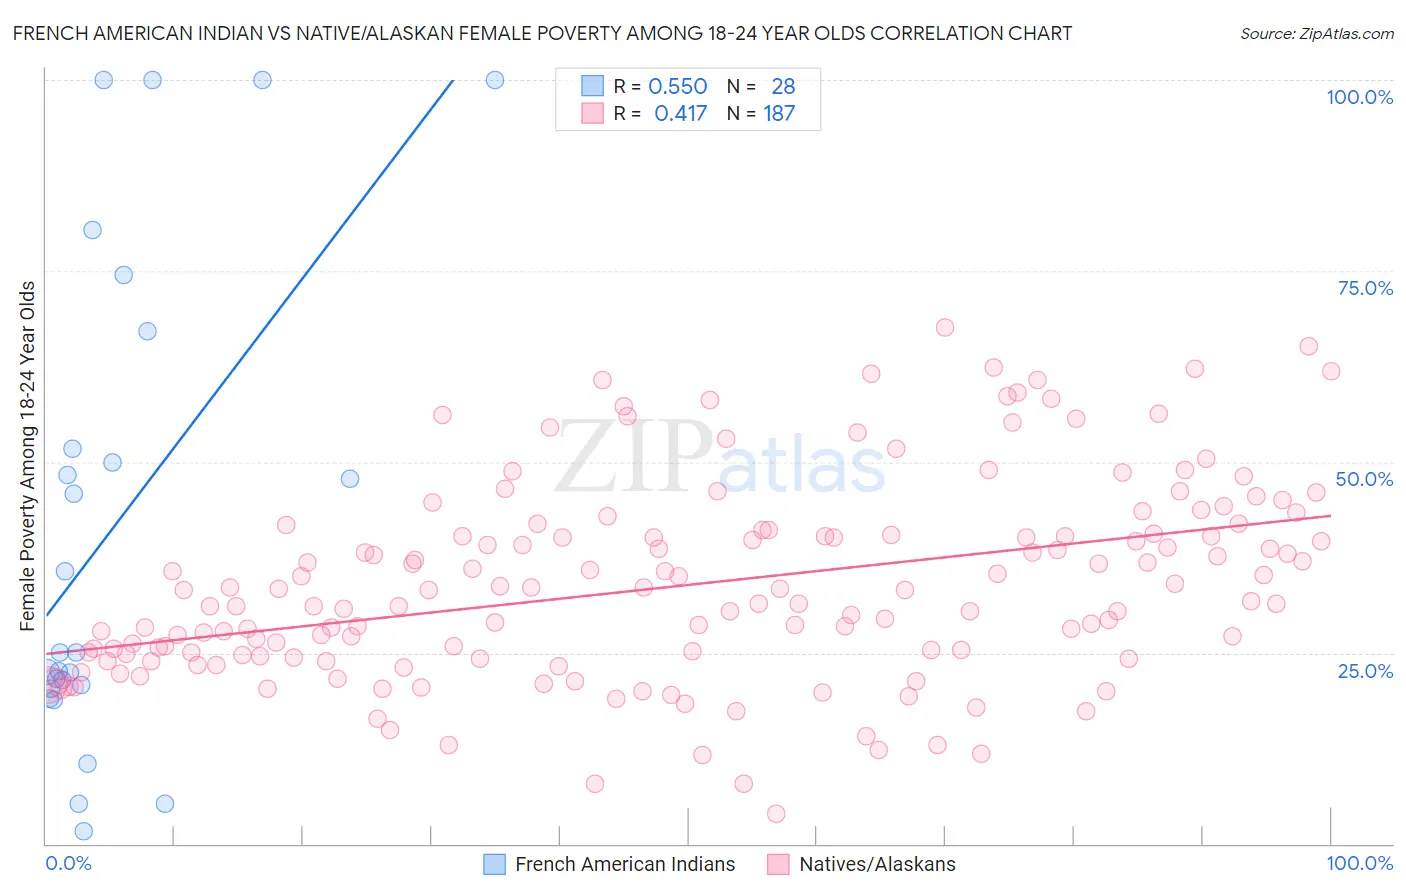 French American Indian vs Native/Alaskan Female Poverty Among 18-24 Year Olds